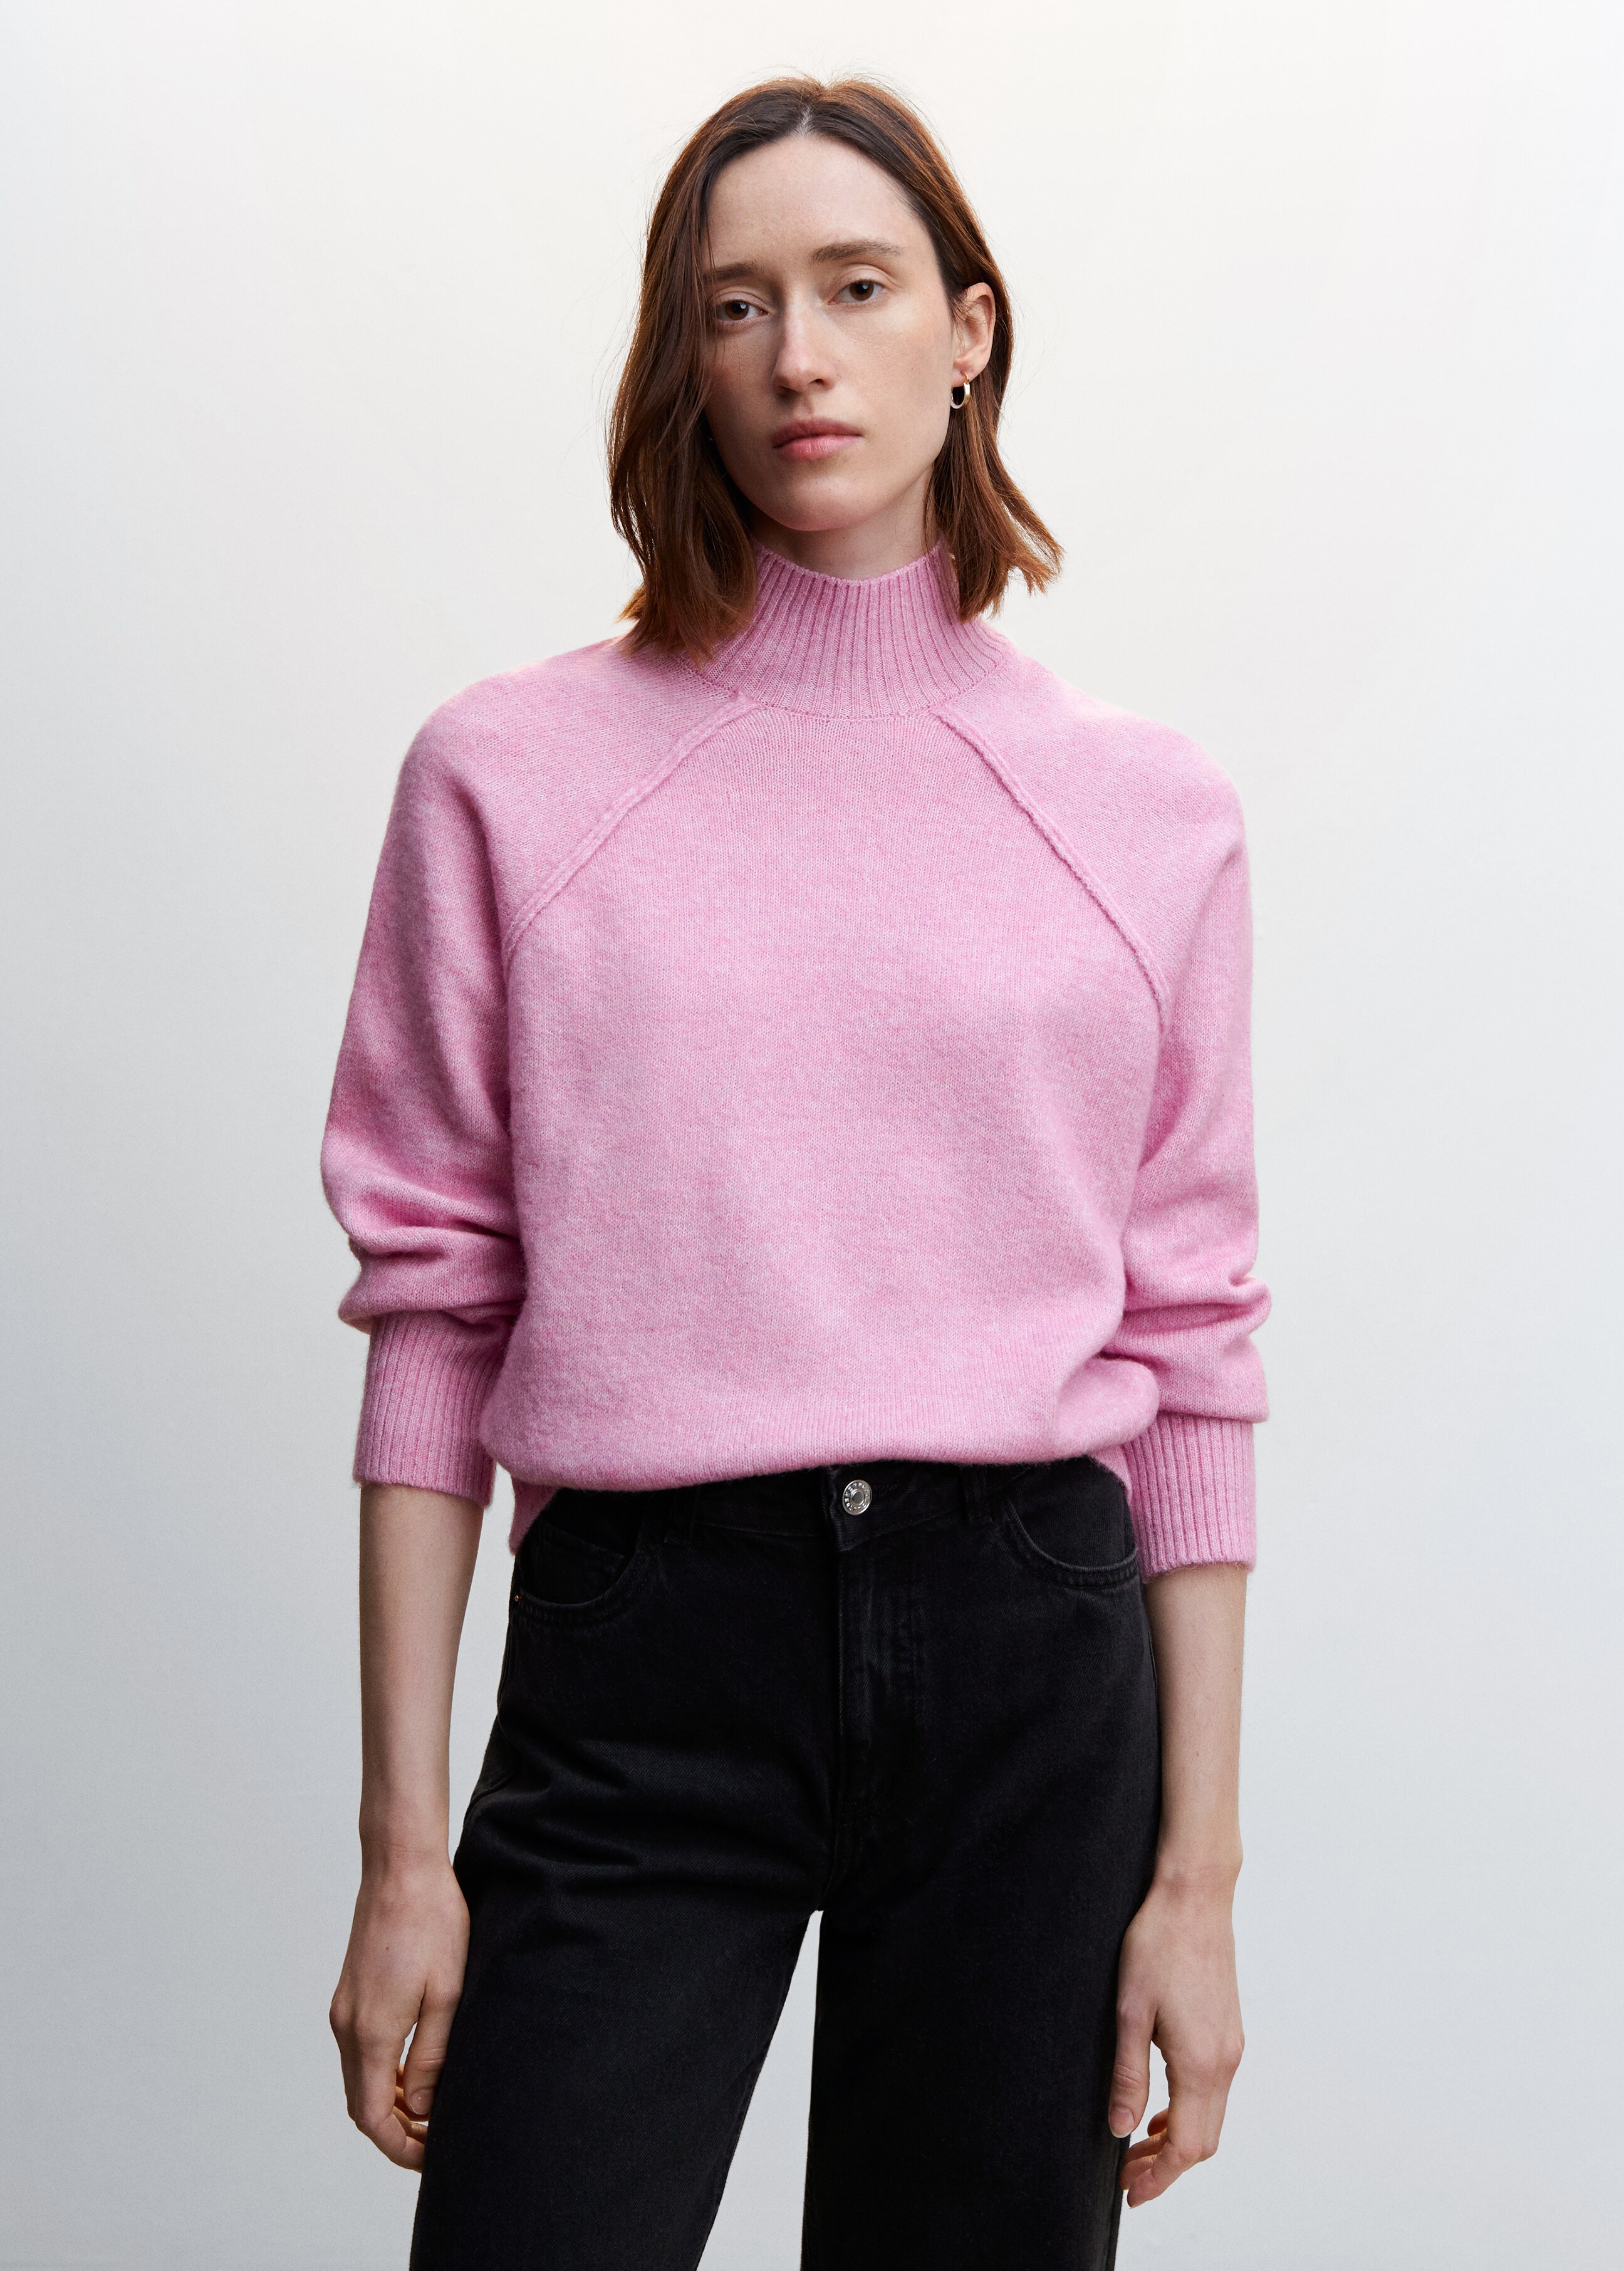 Turtleneck sweater with seams